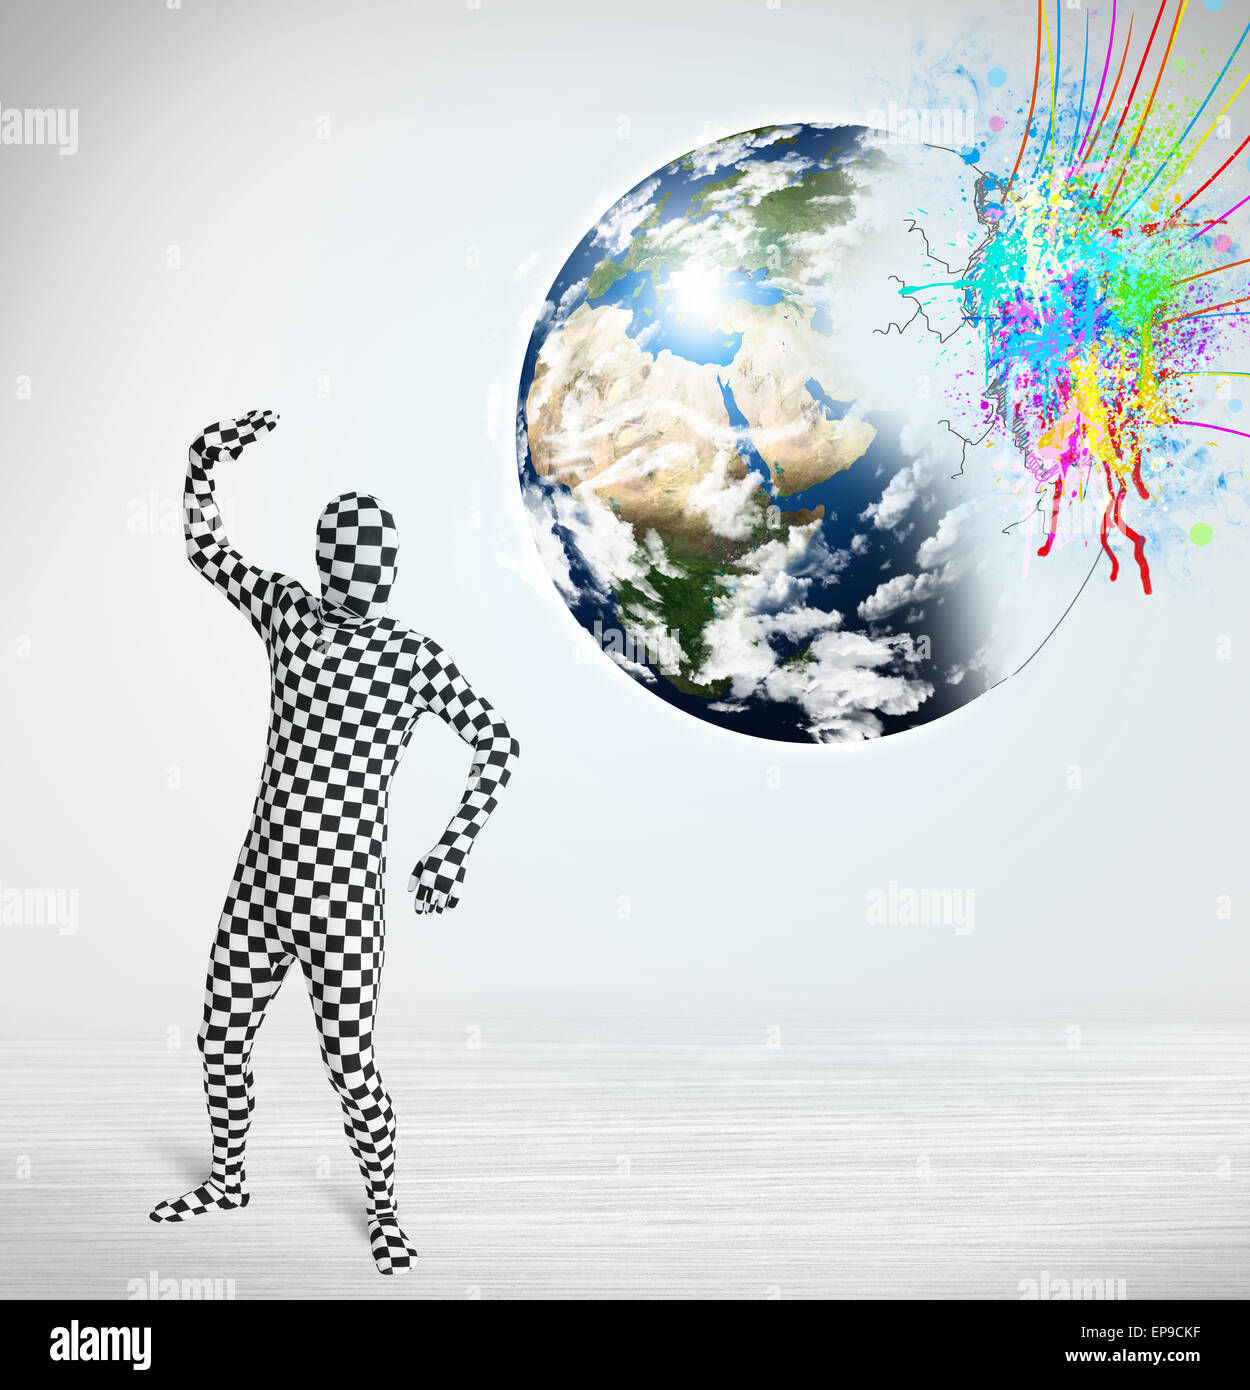 Funny man in body suit looking at colorful splatter earth Stock Photo